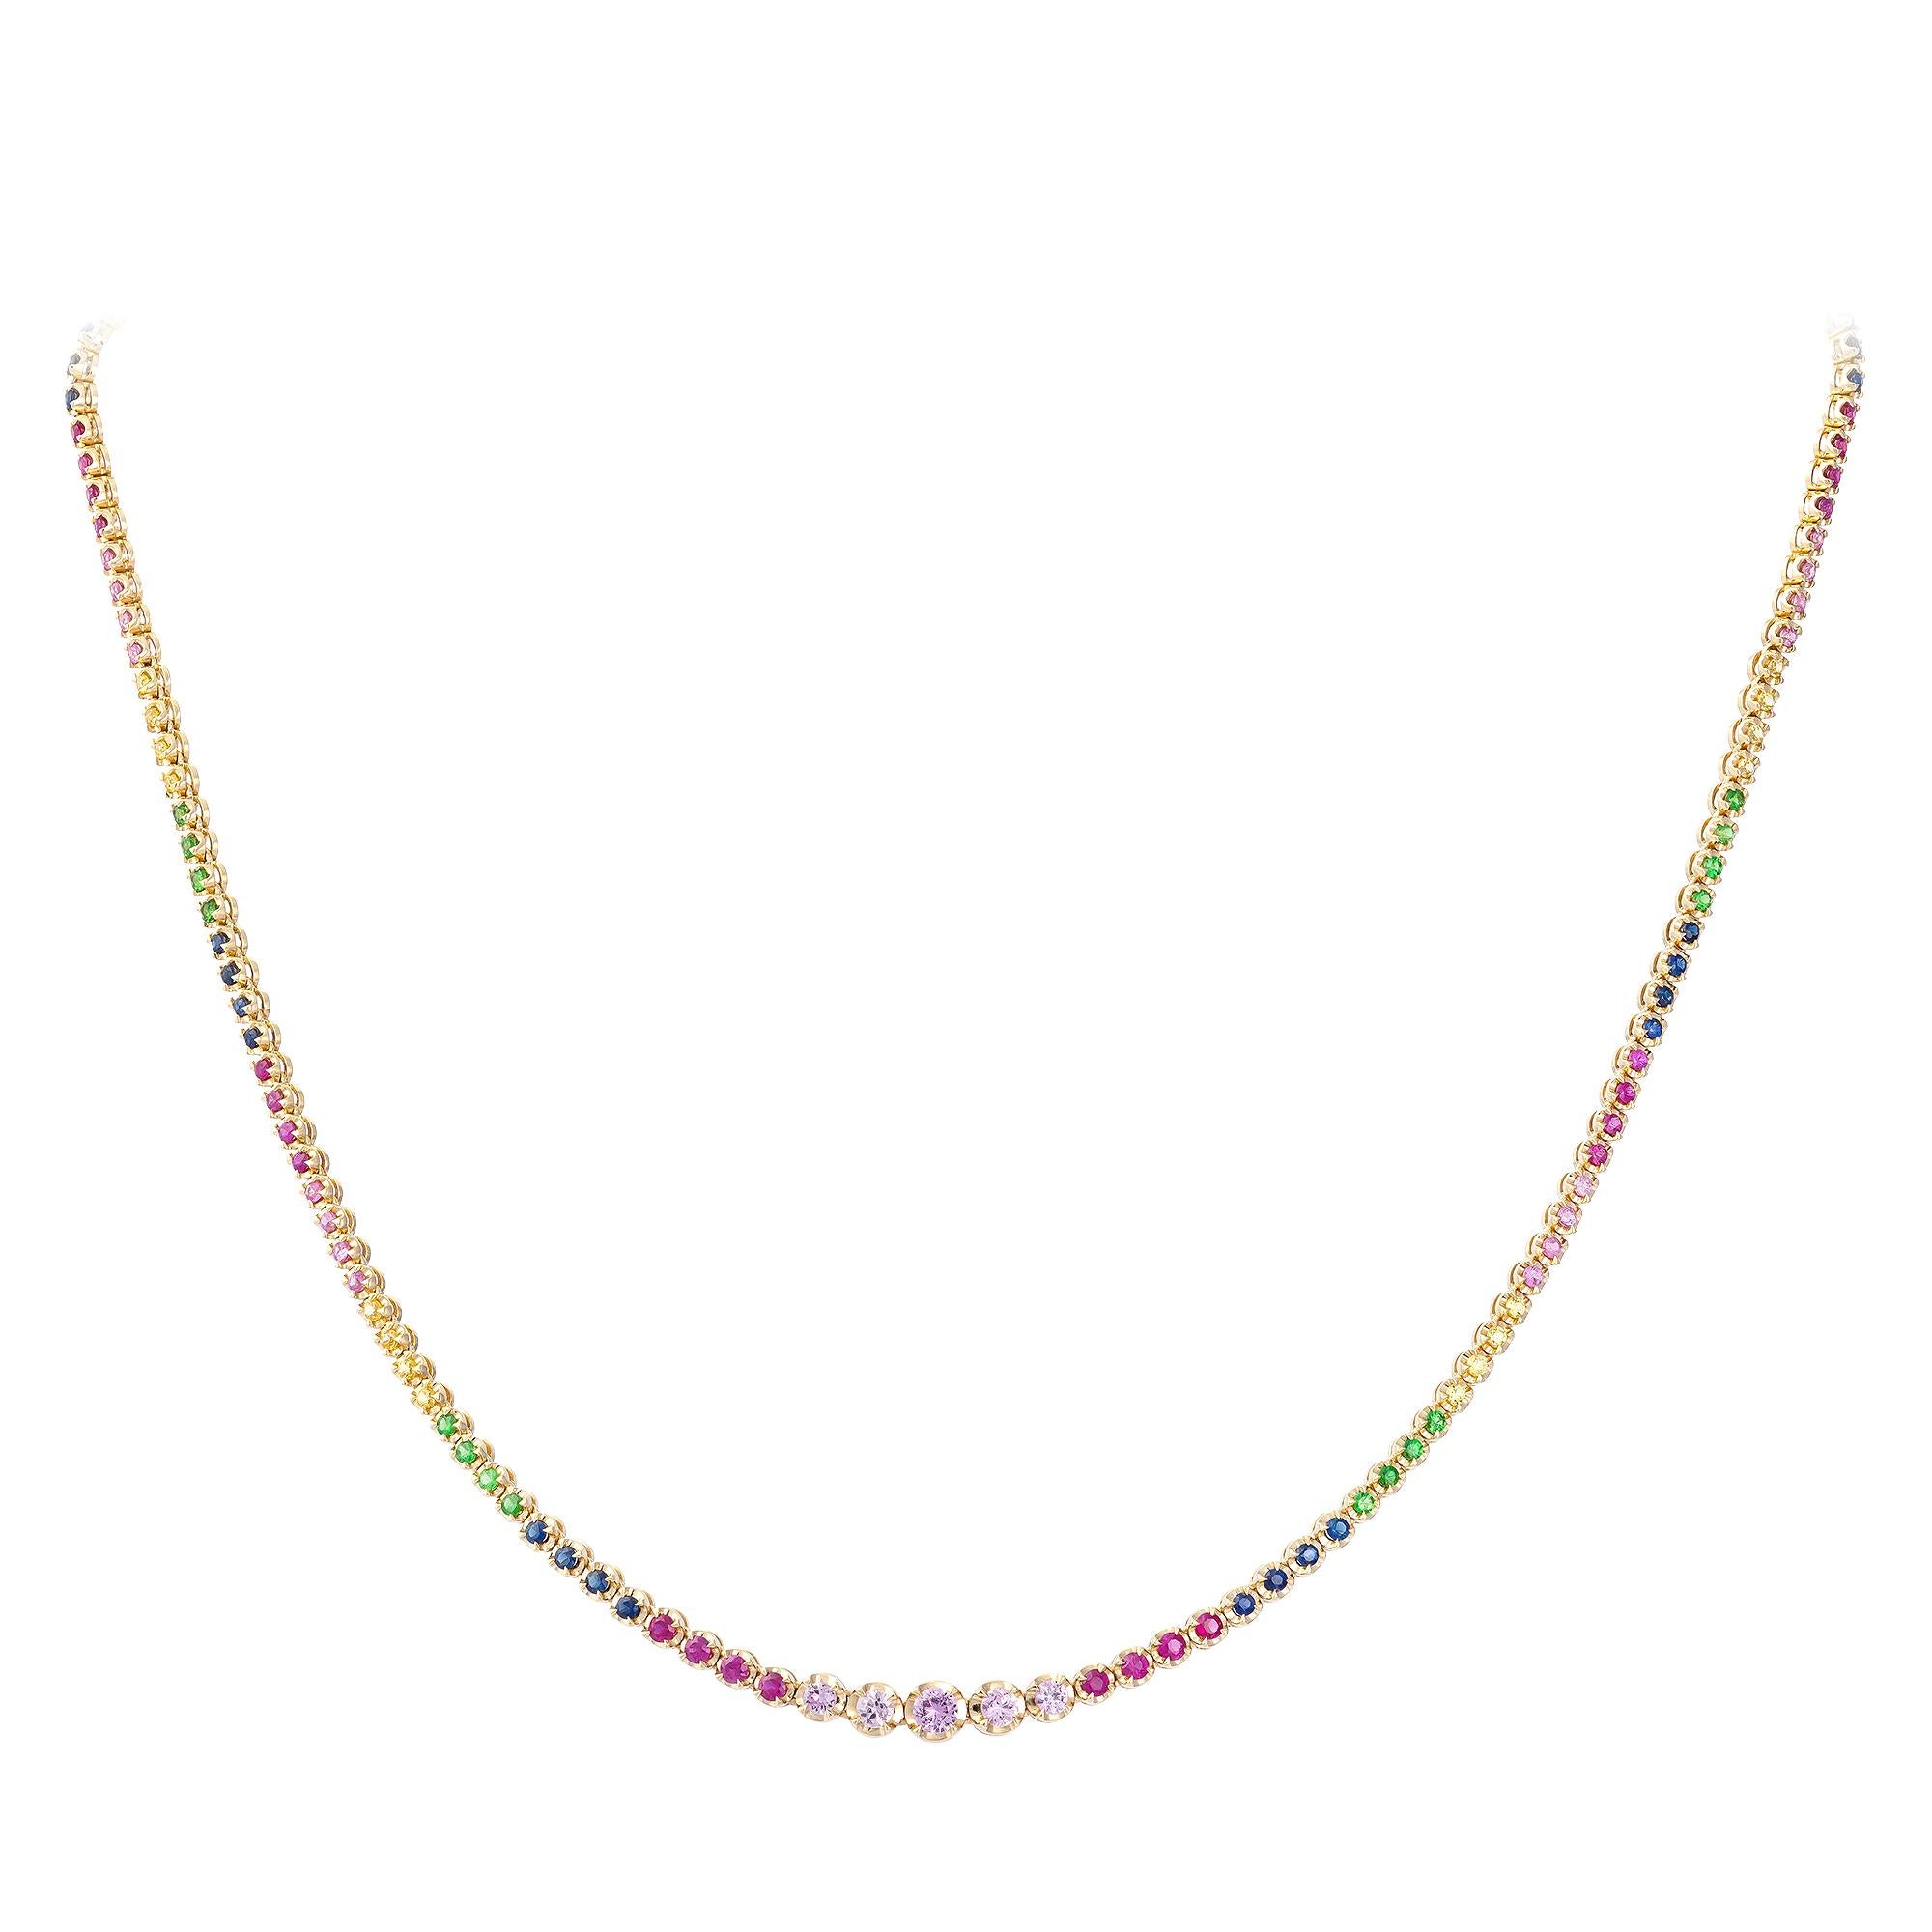 Antique Cushion Cut Fashionable Circle Multi Sapphire 18k White Gold Necklace Choker for Her For Sale